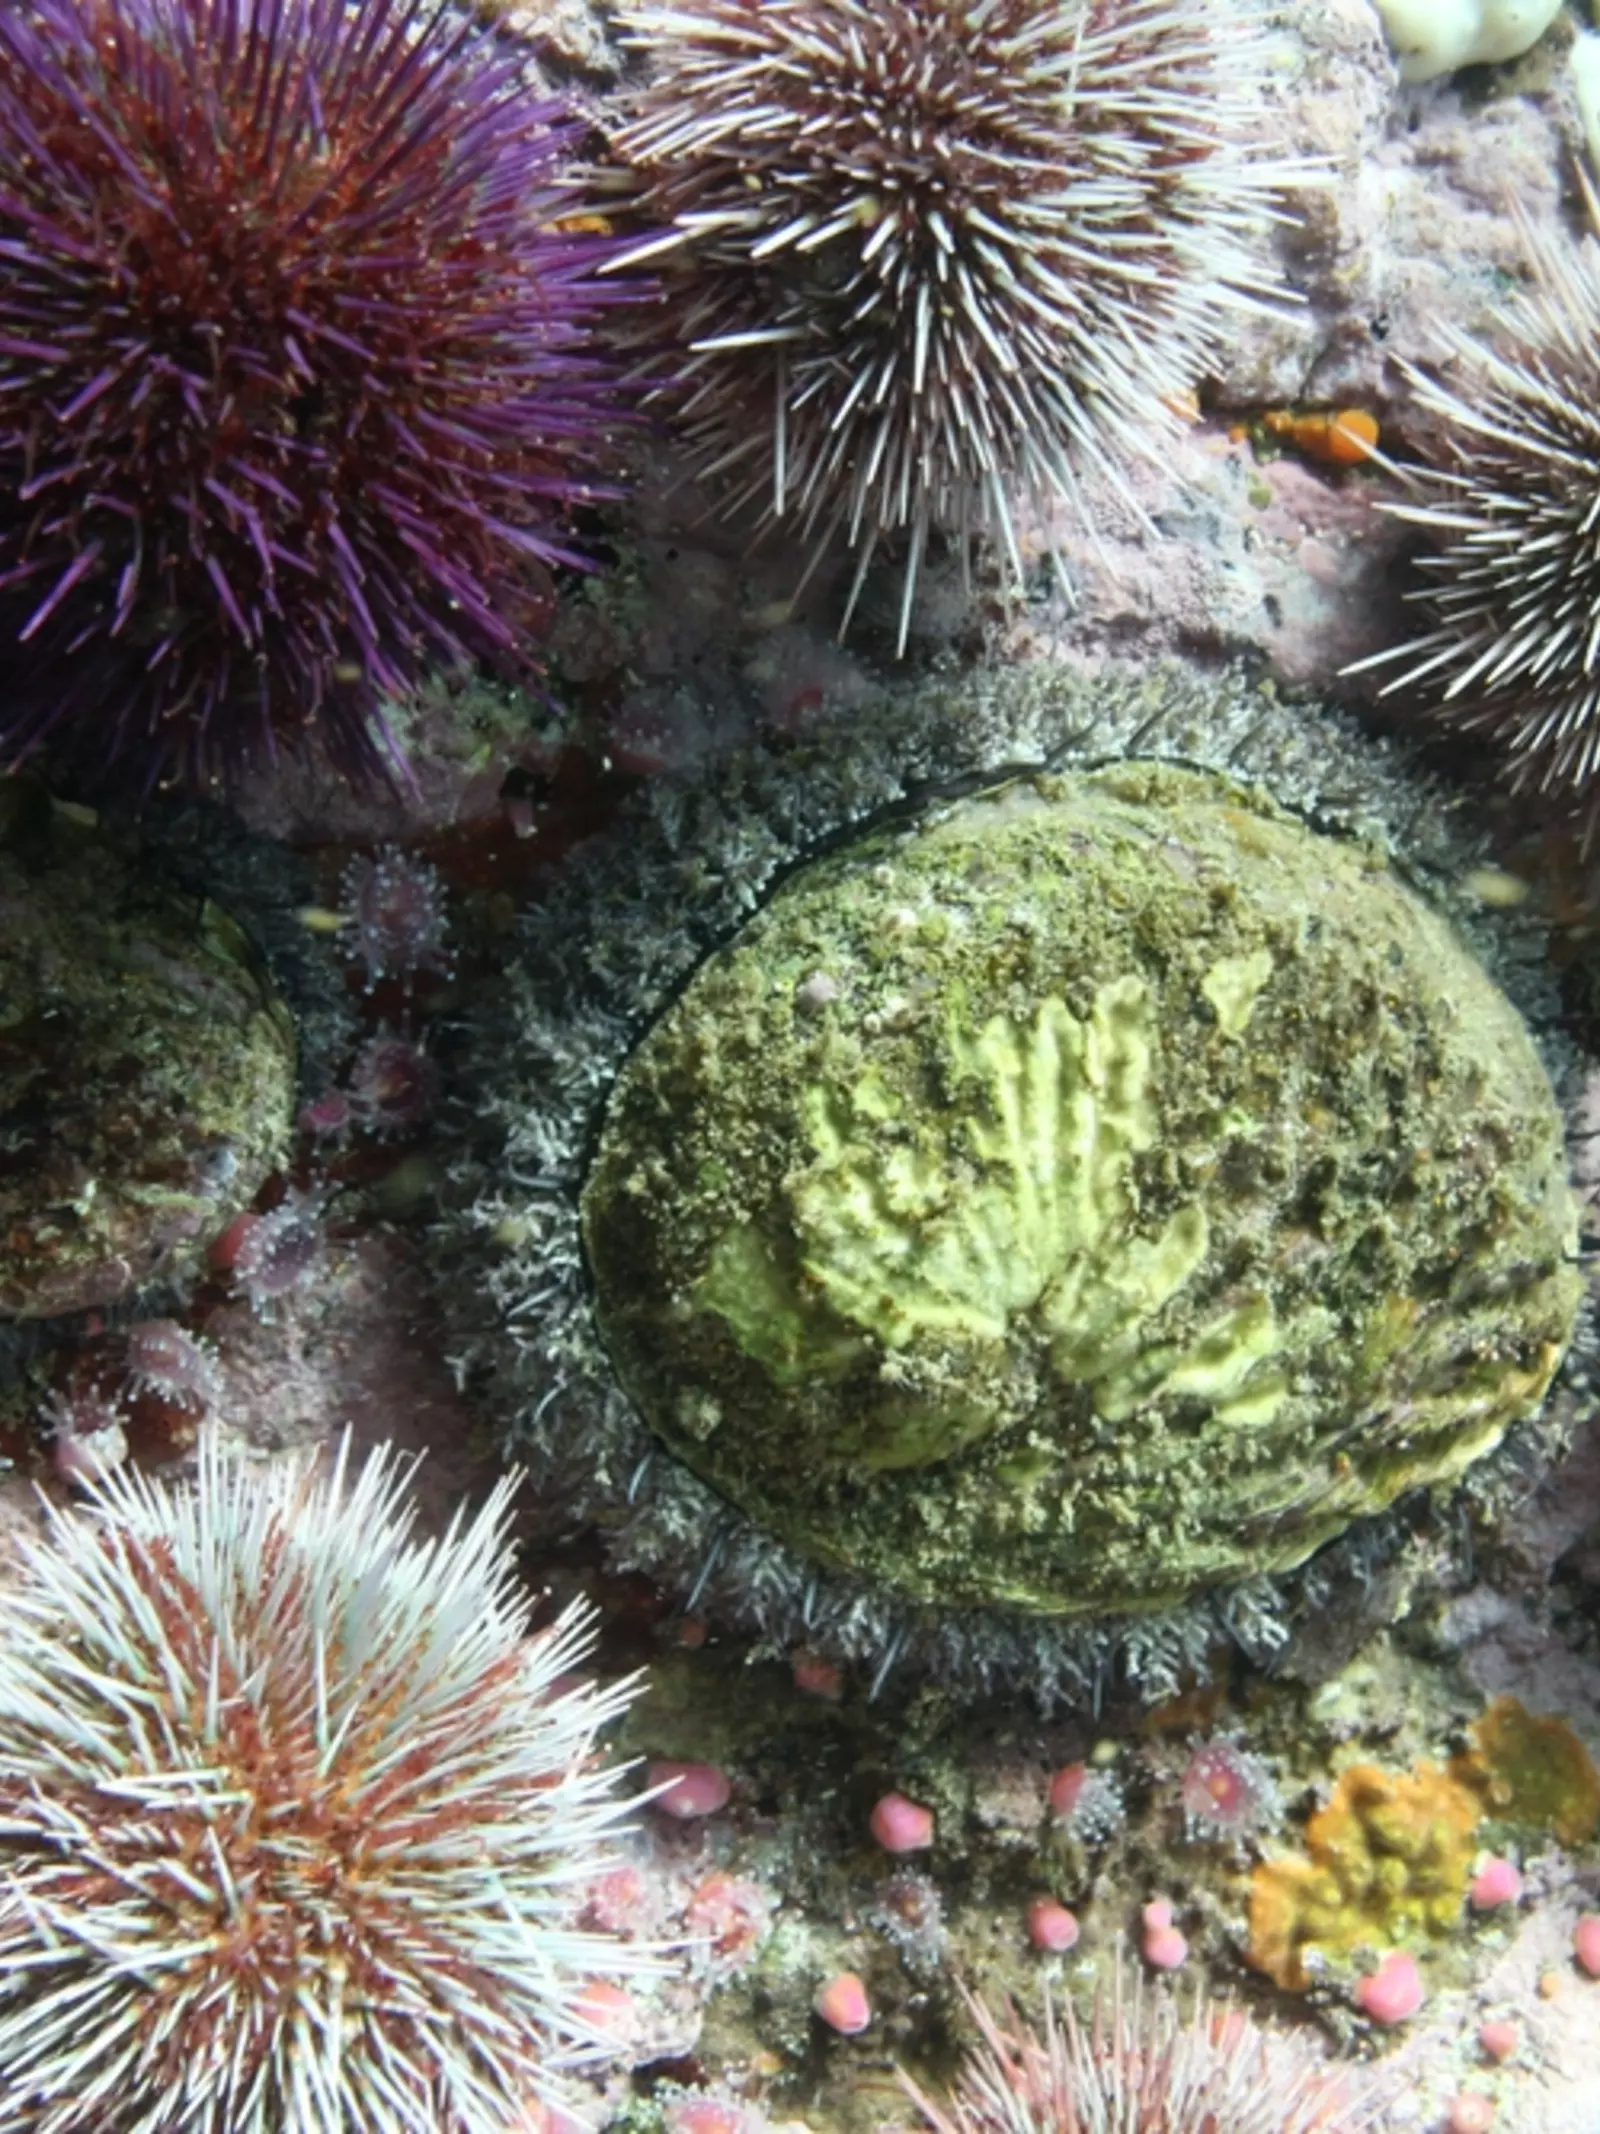 A living abalone surrounded by other marine life.